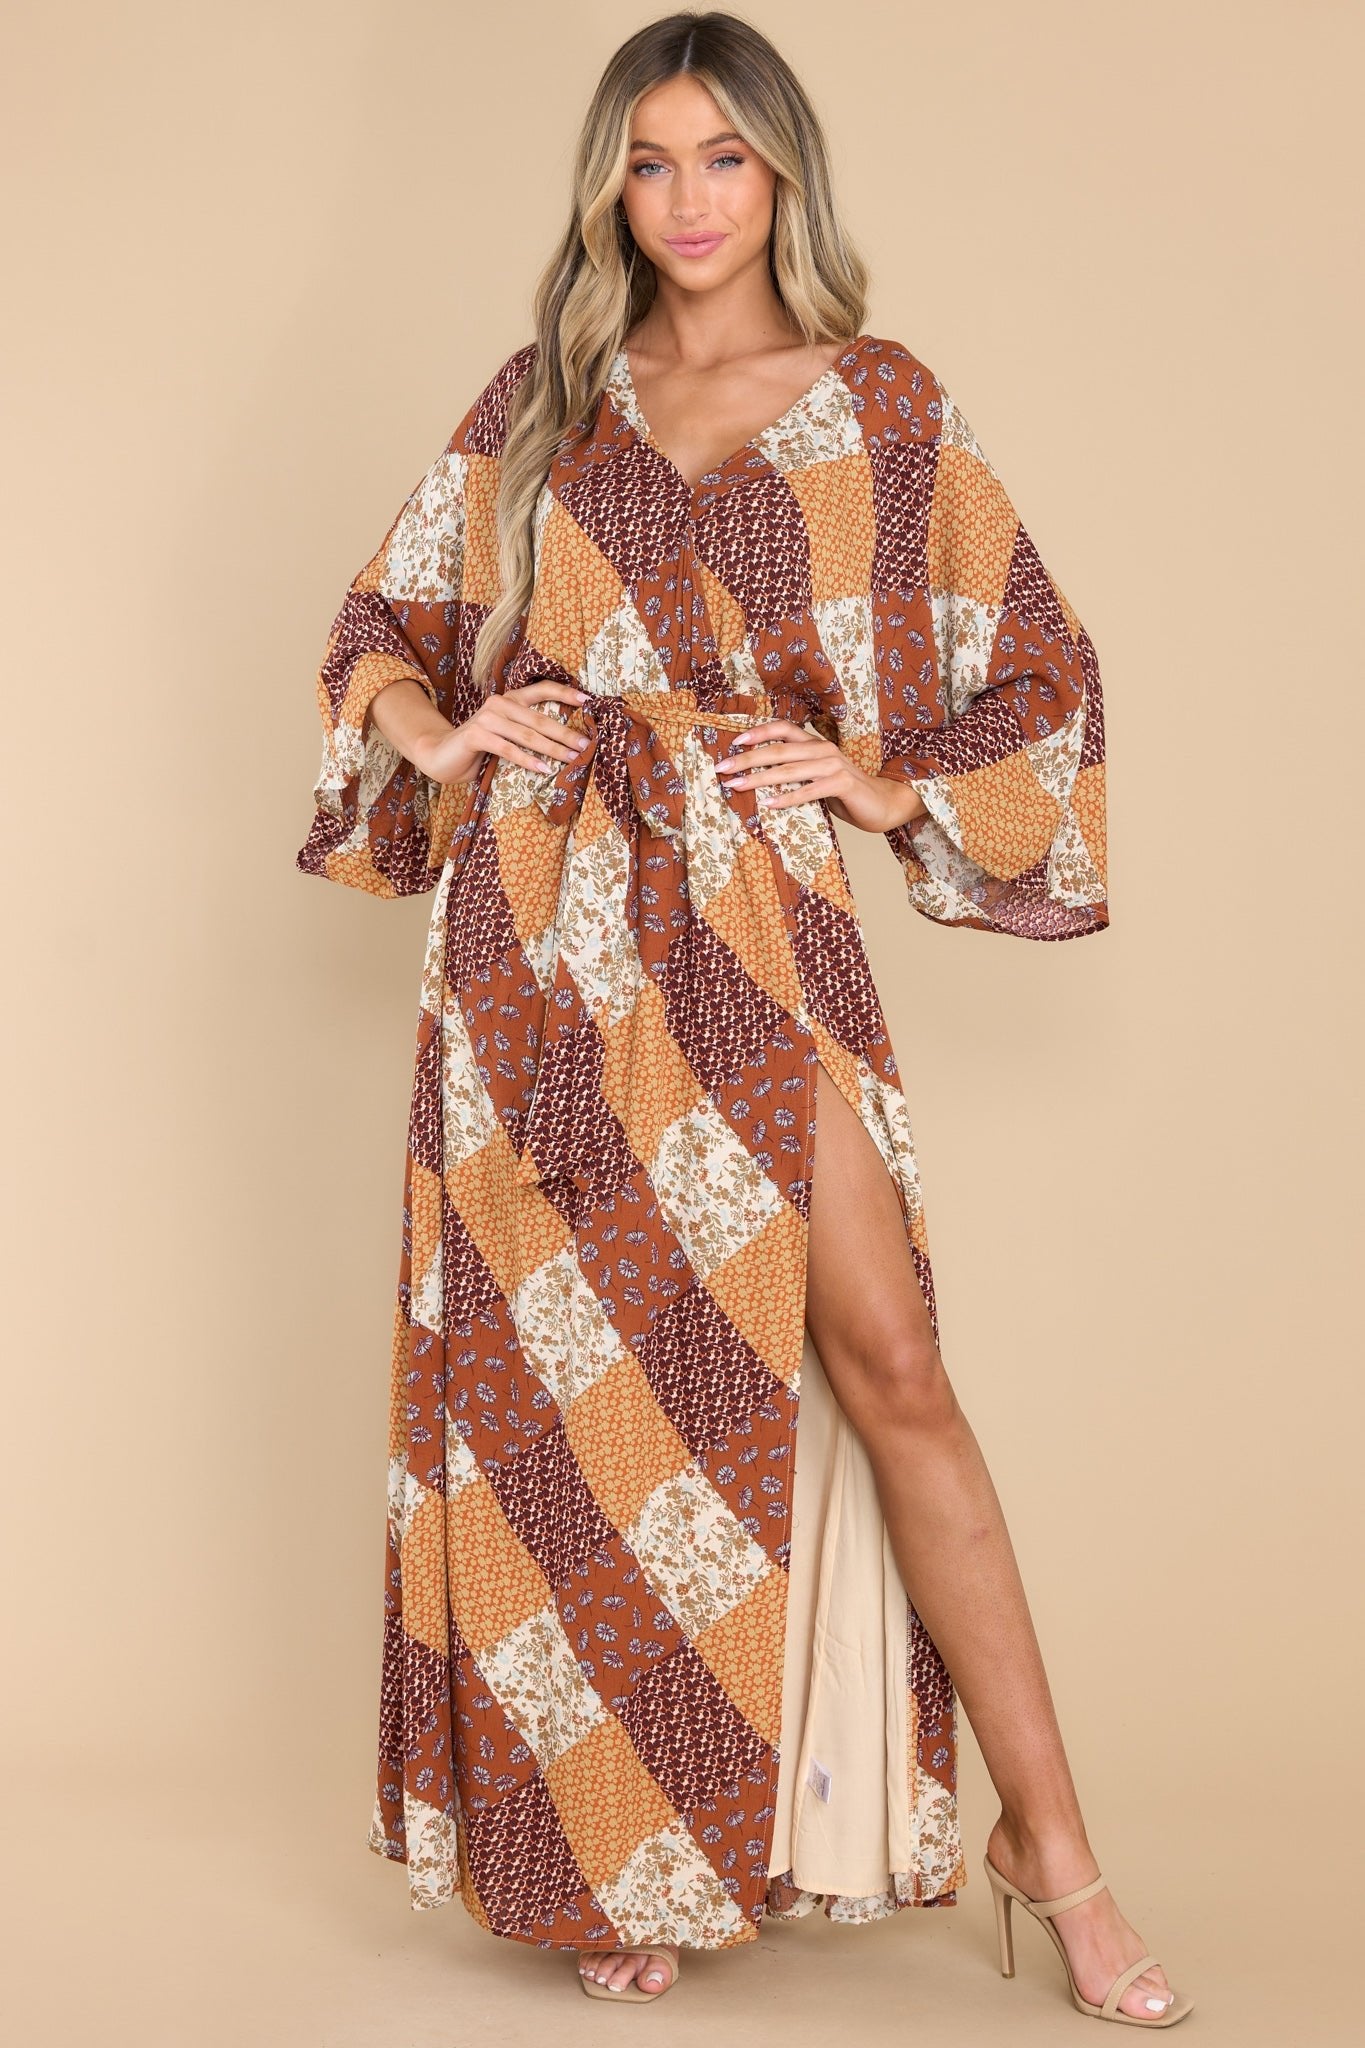 Glowing Comfort Brown Floral Print Maxi Dress - Red Dress